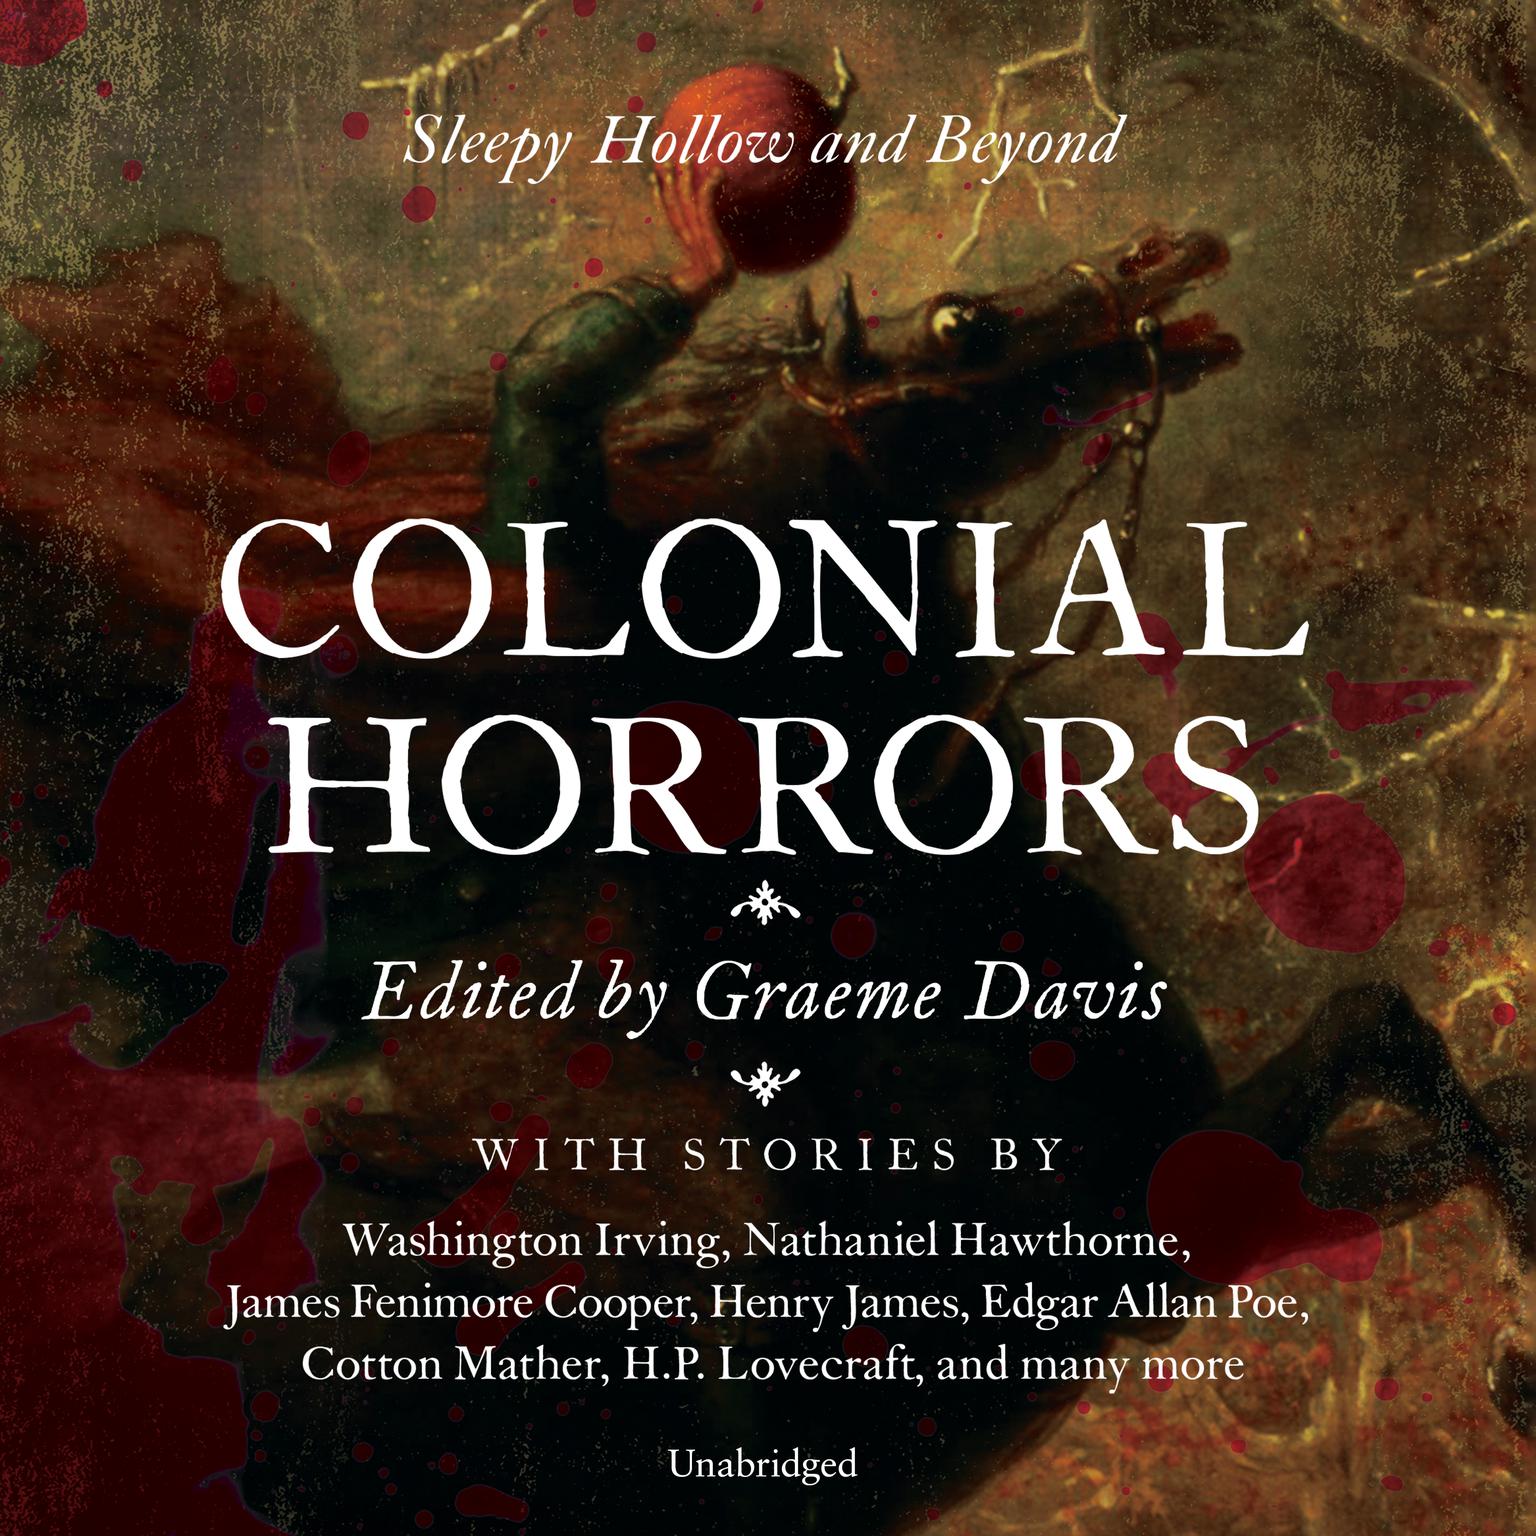 Colonial Horrors: Sleepy Hollow and Beyond Audiobook, by various authors